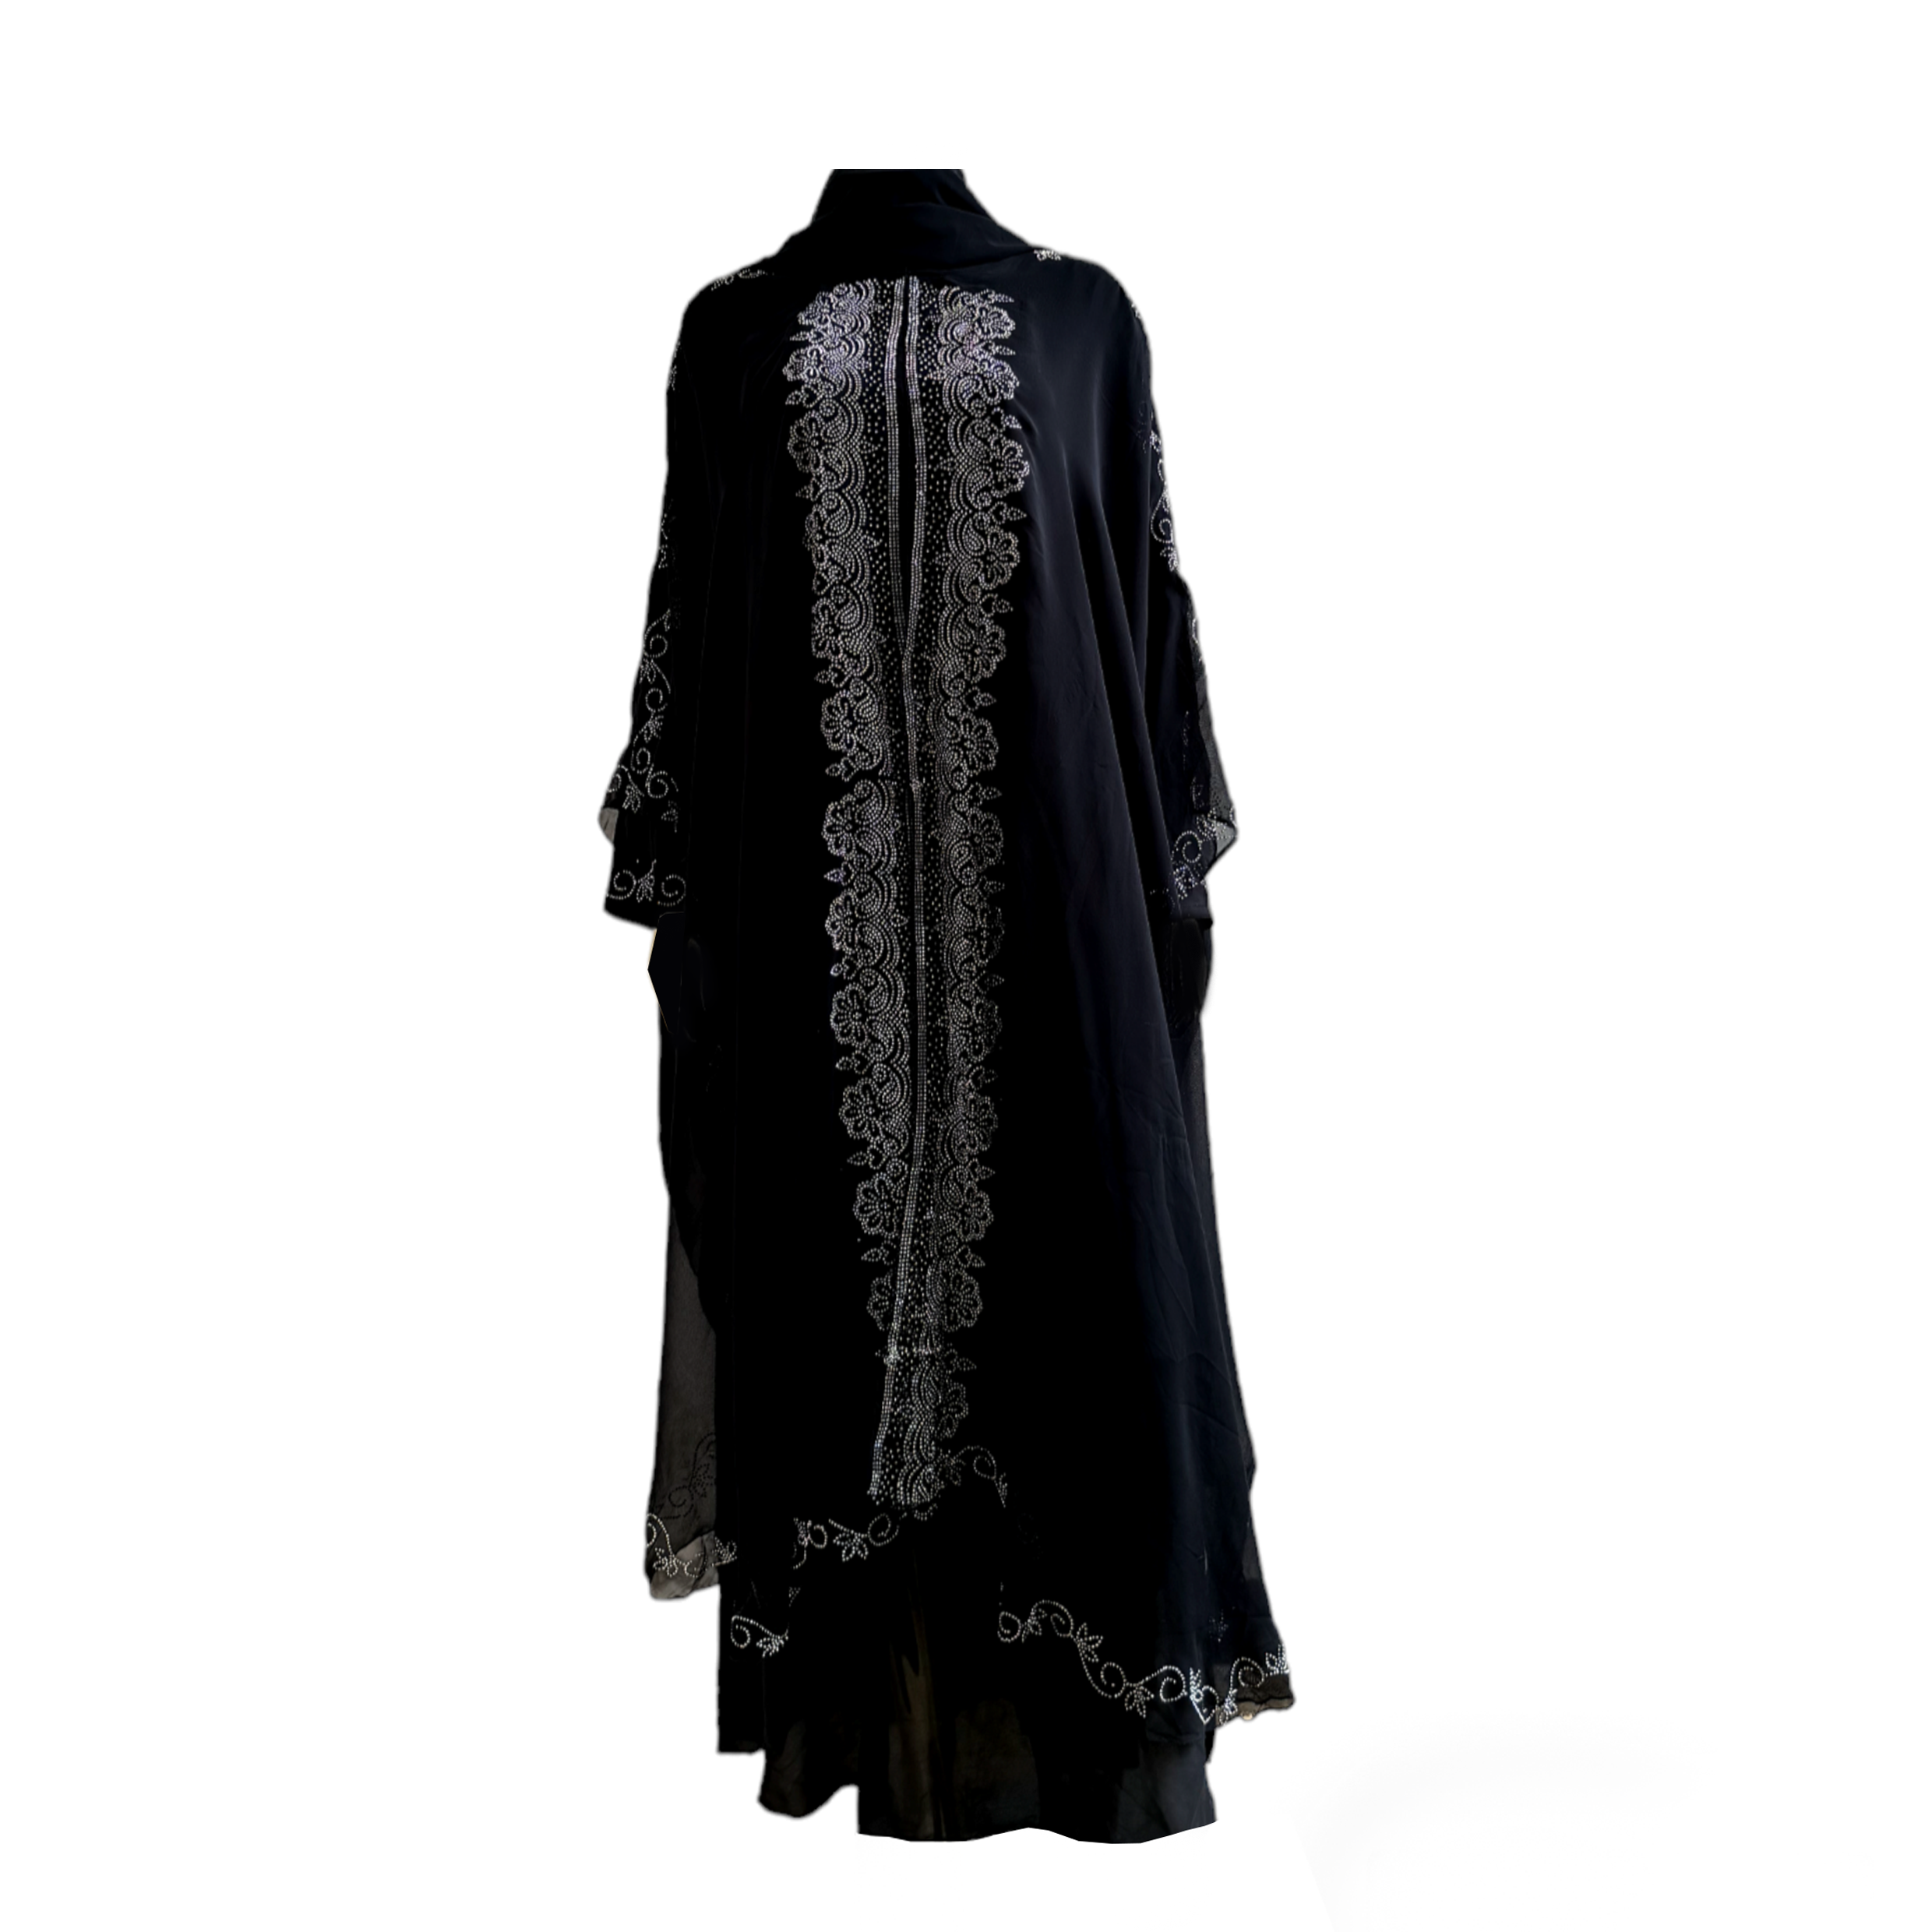 Occasional Abaya with Bedazzled Sheer Outer Layer